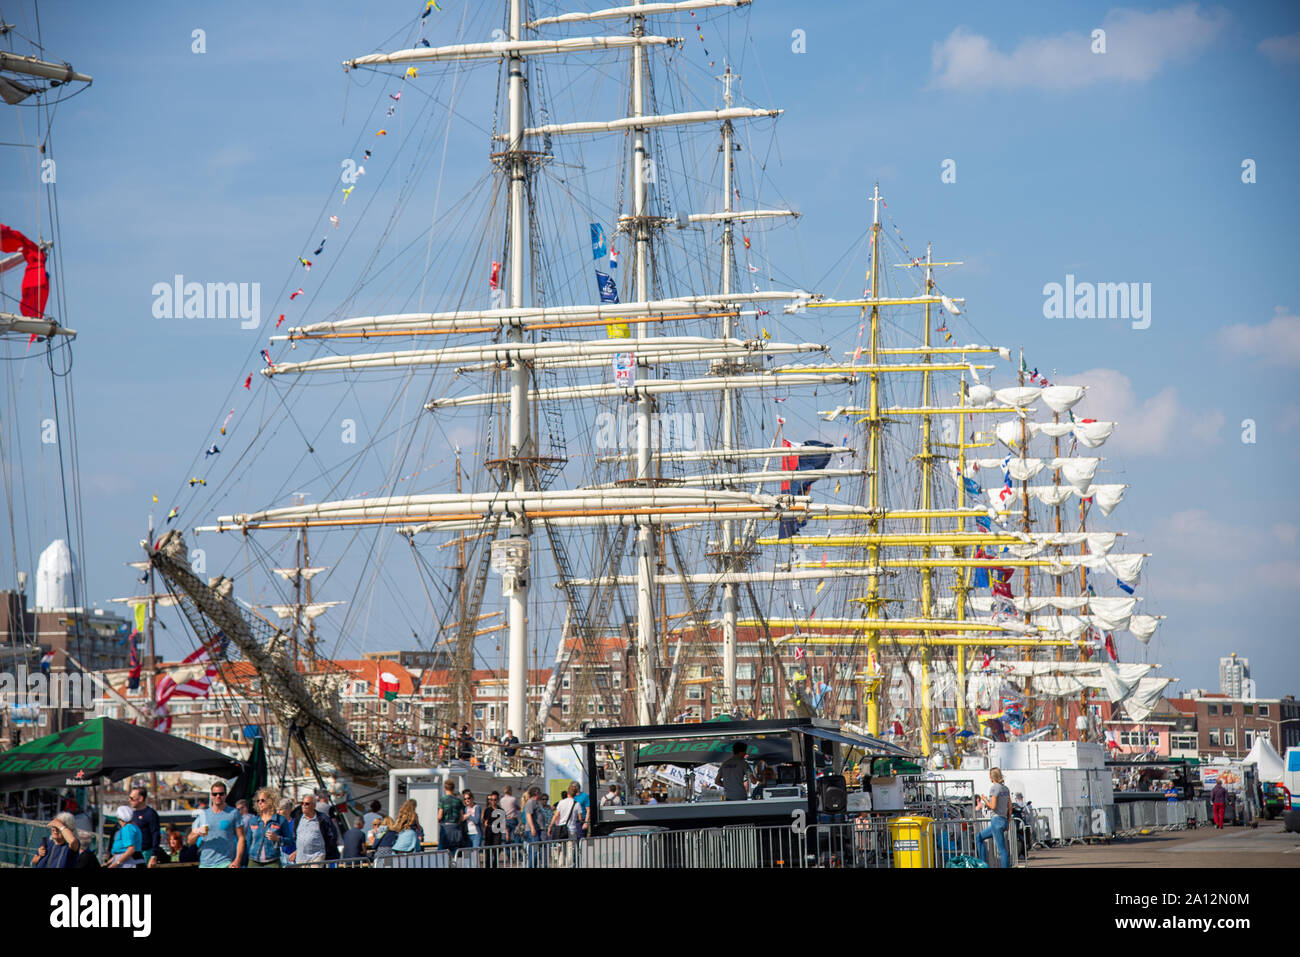 Sail 2019 Scheveningen with tall ships in the harbor Stock Photo